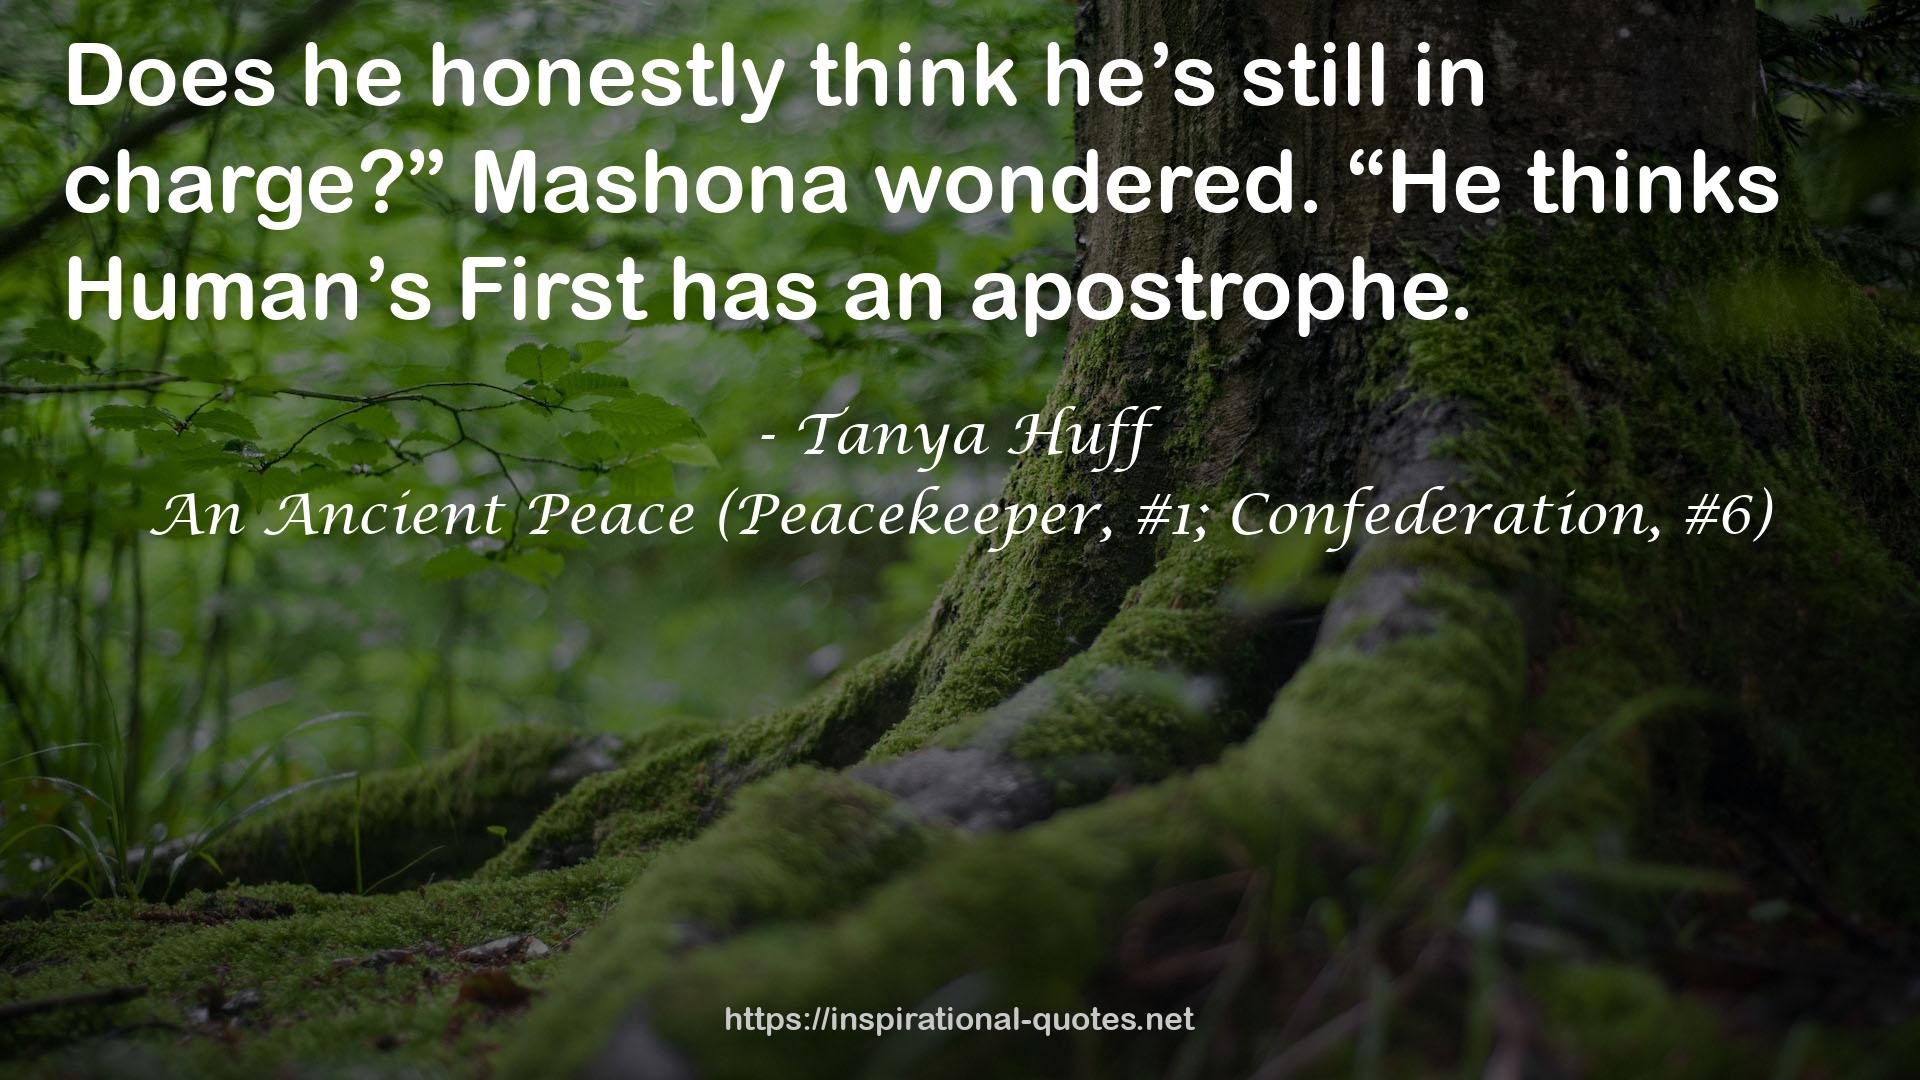 An Ancient Peace (Peacekeeper, #1; Confederation, #6) QUOTES